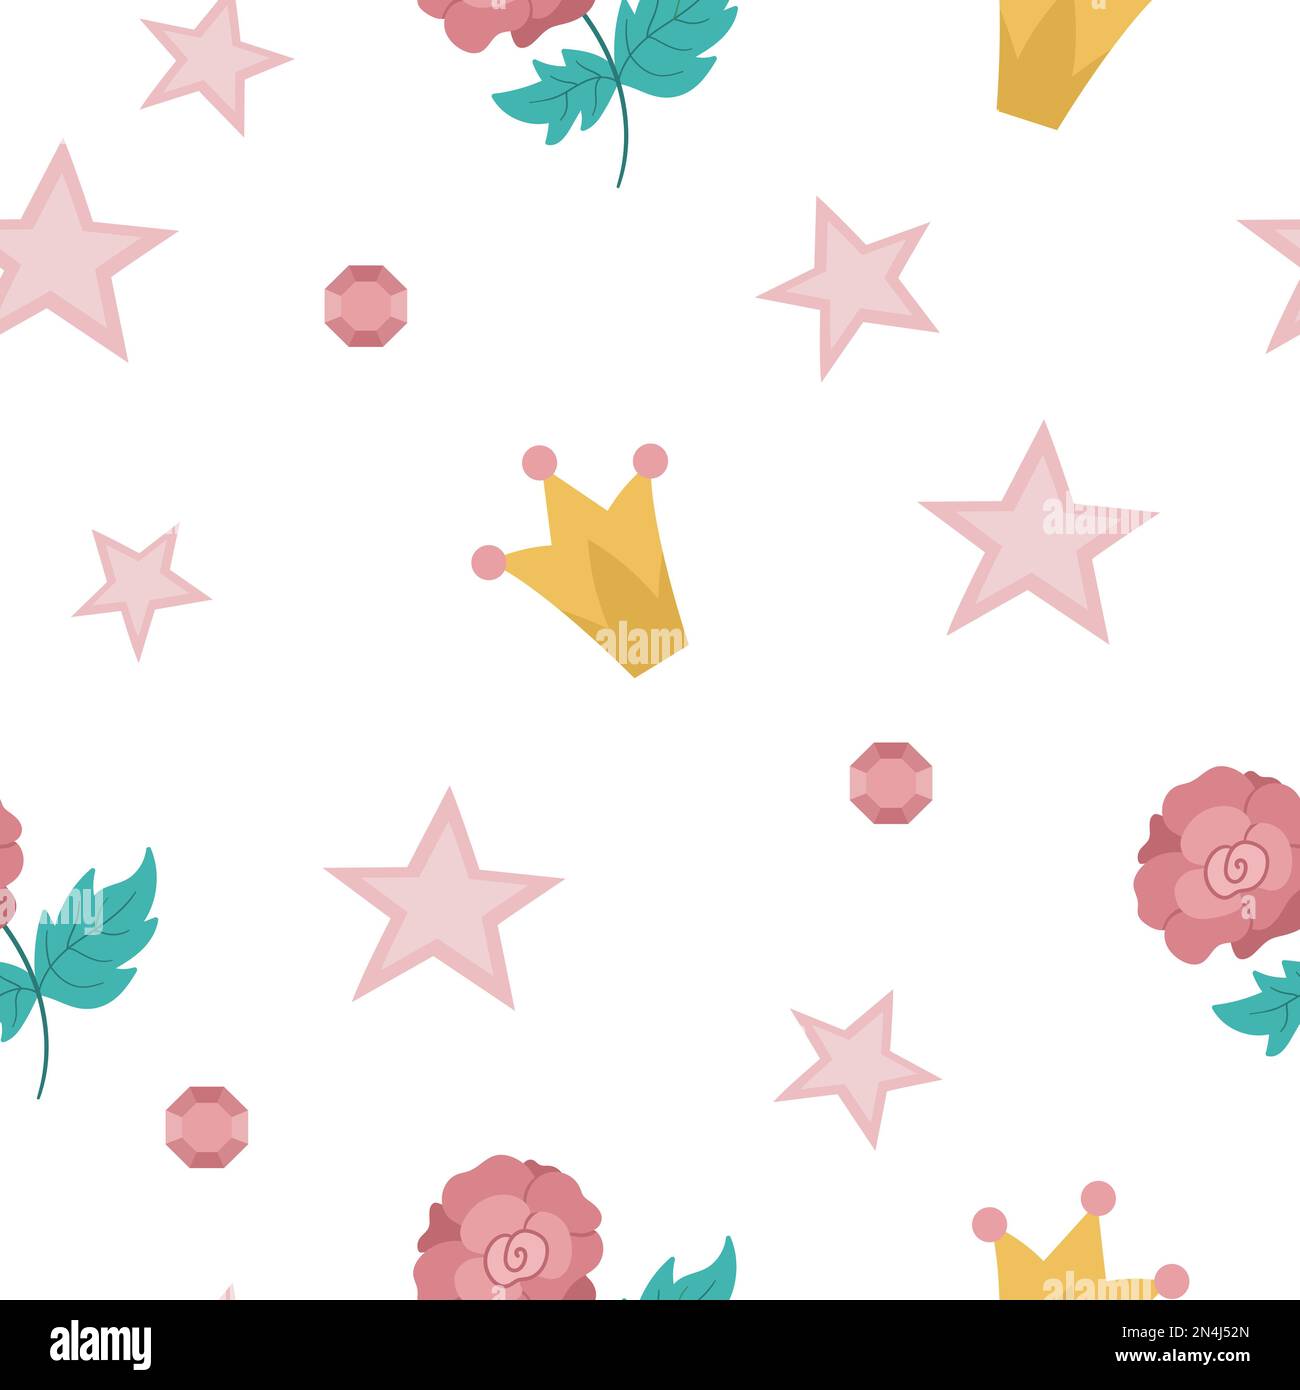 Vector seamless pattern with pink rose, stars, crowns, gems. Simple fairy tale princess repeat background. Girlish cartoon magic texture with fantasy Stock Vector